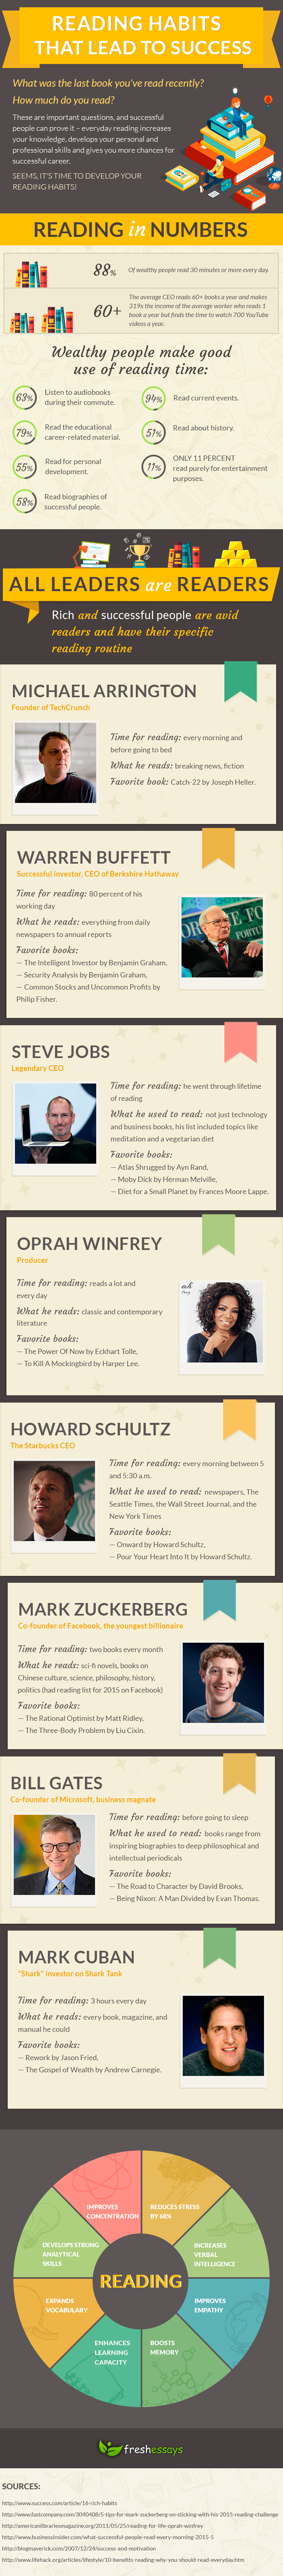 Reading Habits  that lead to success infographic | From the blog of Nicholas C. Rossis, author of science fiction, the Pearseus epic fantasy series and children's books